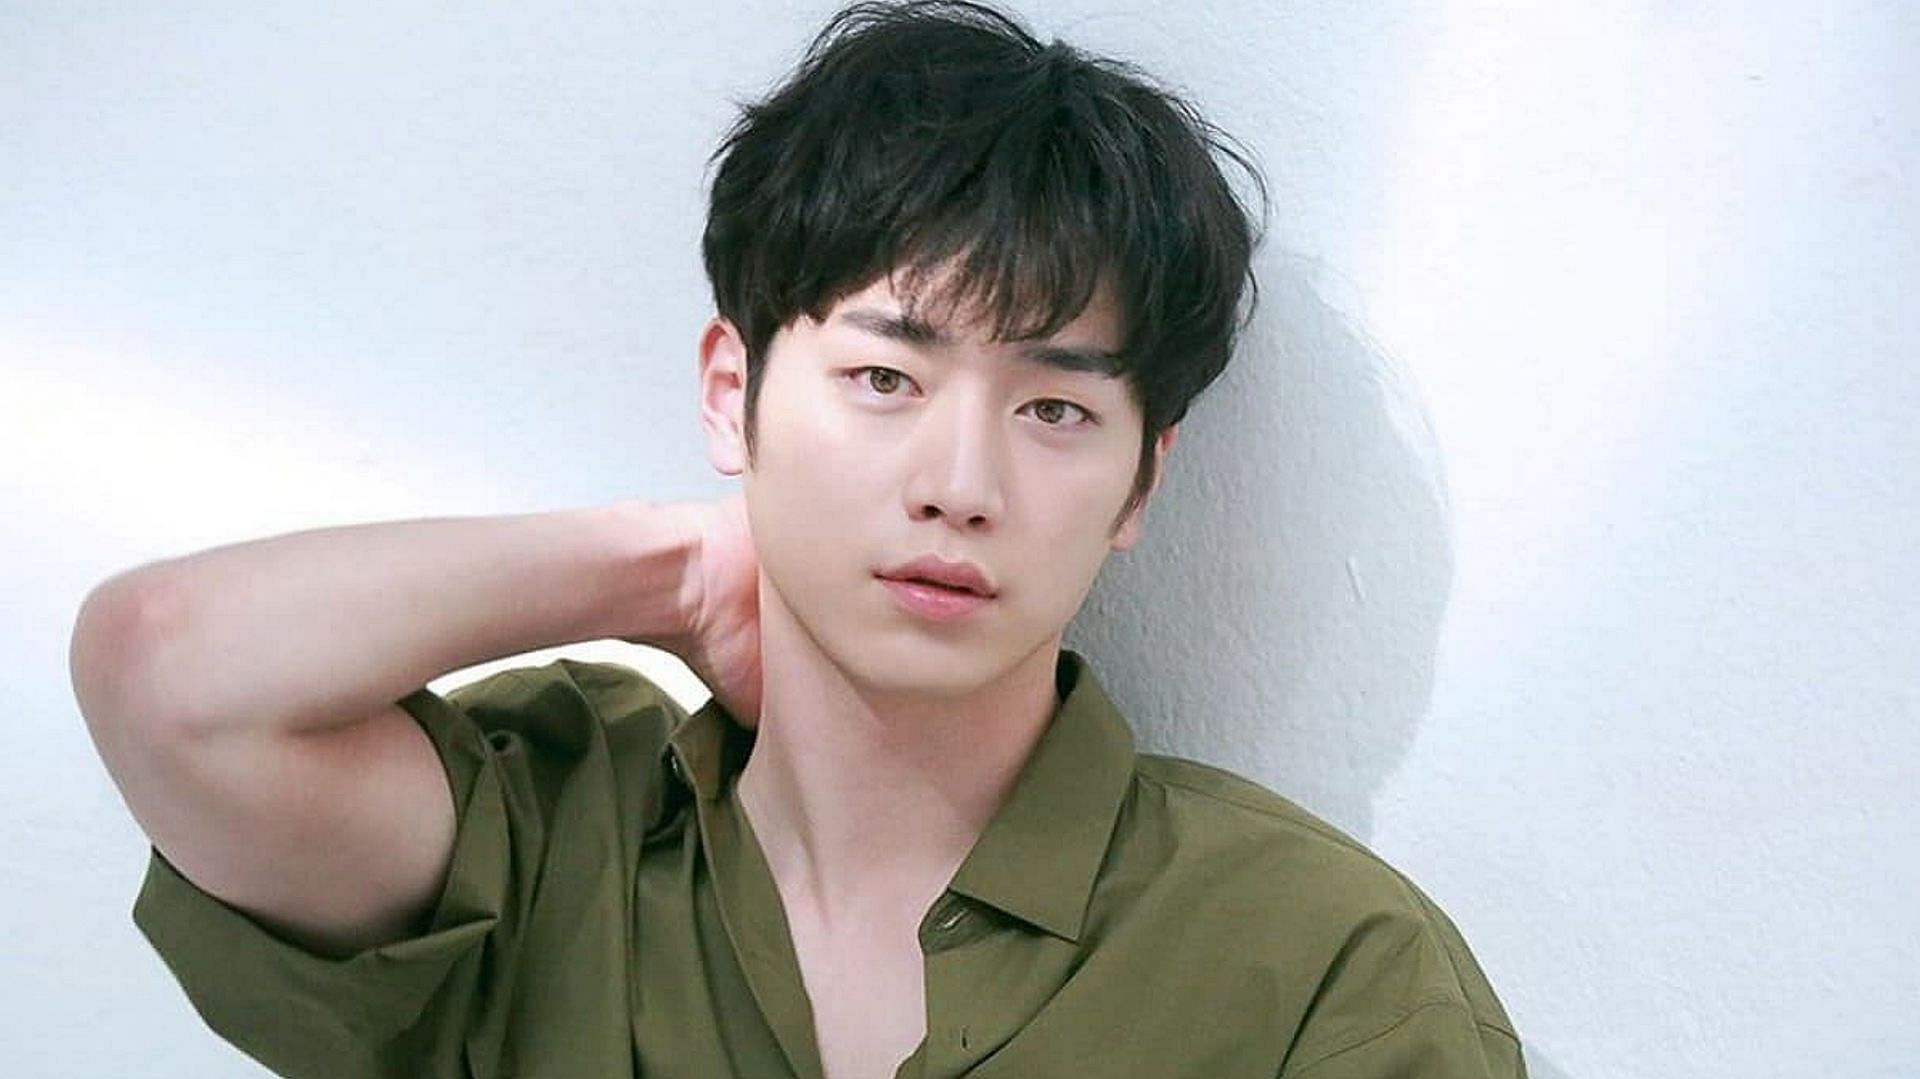 Seo Kang Joon currently has two projects lined up. (Image via Viki)